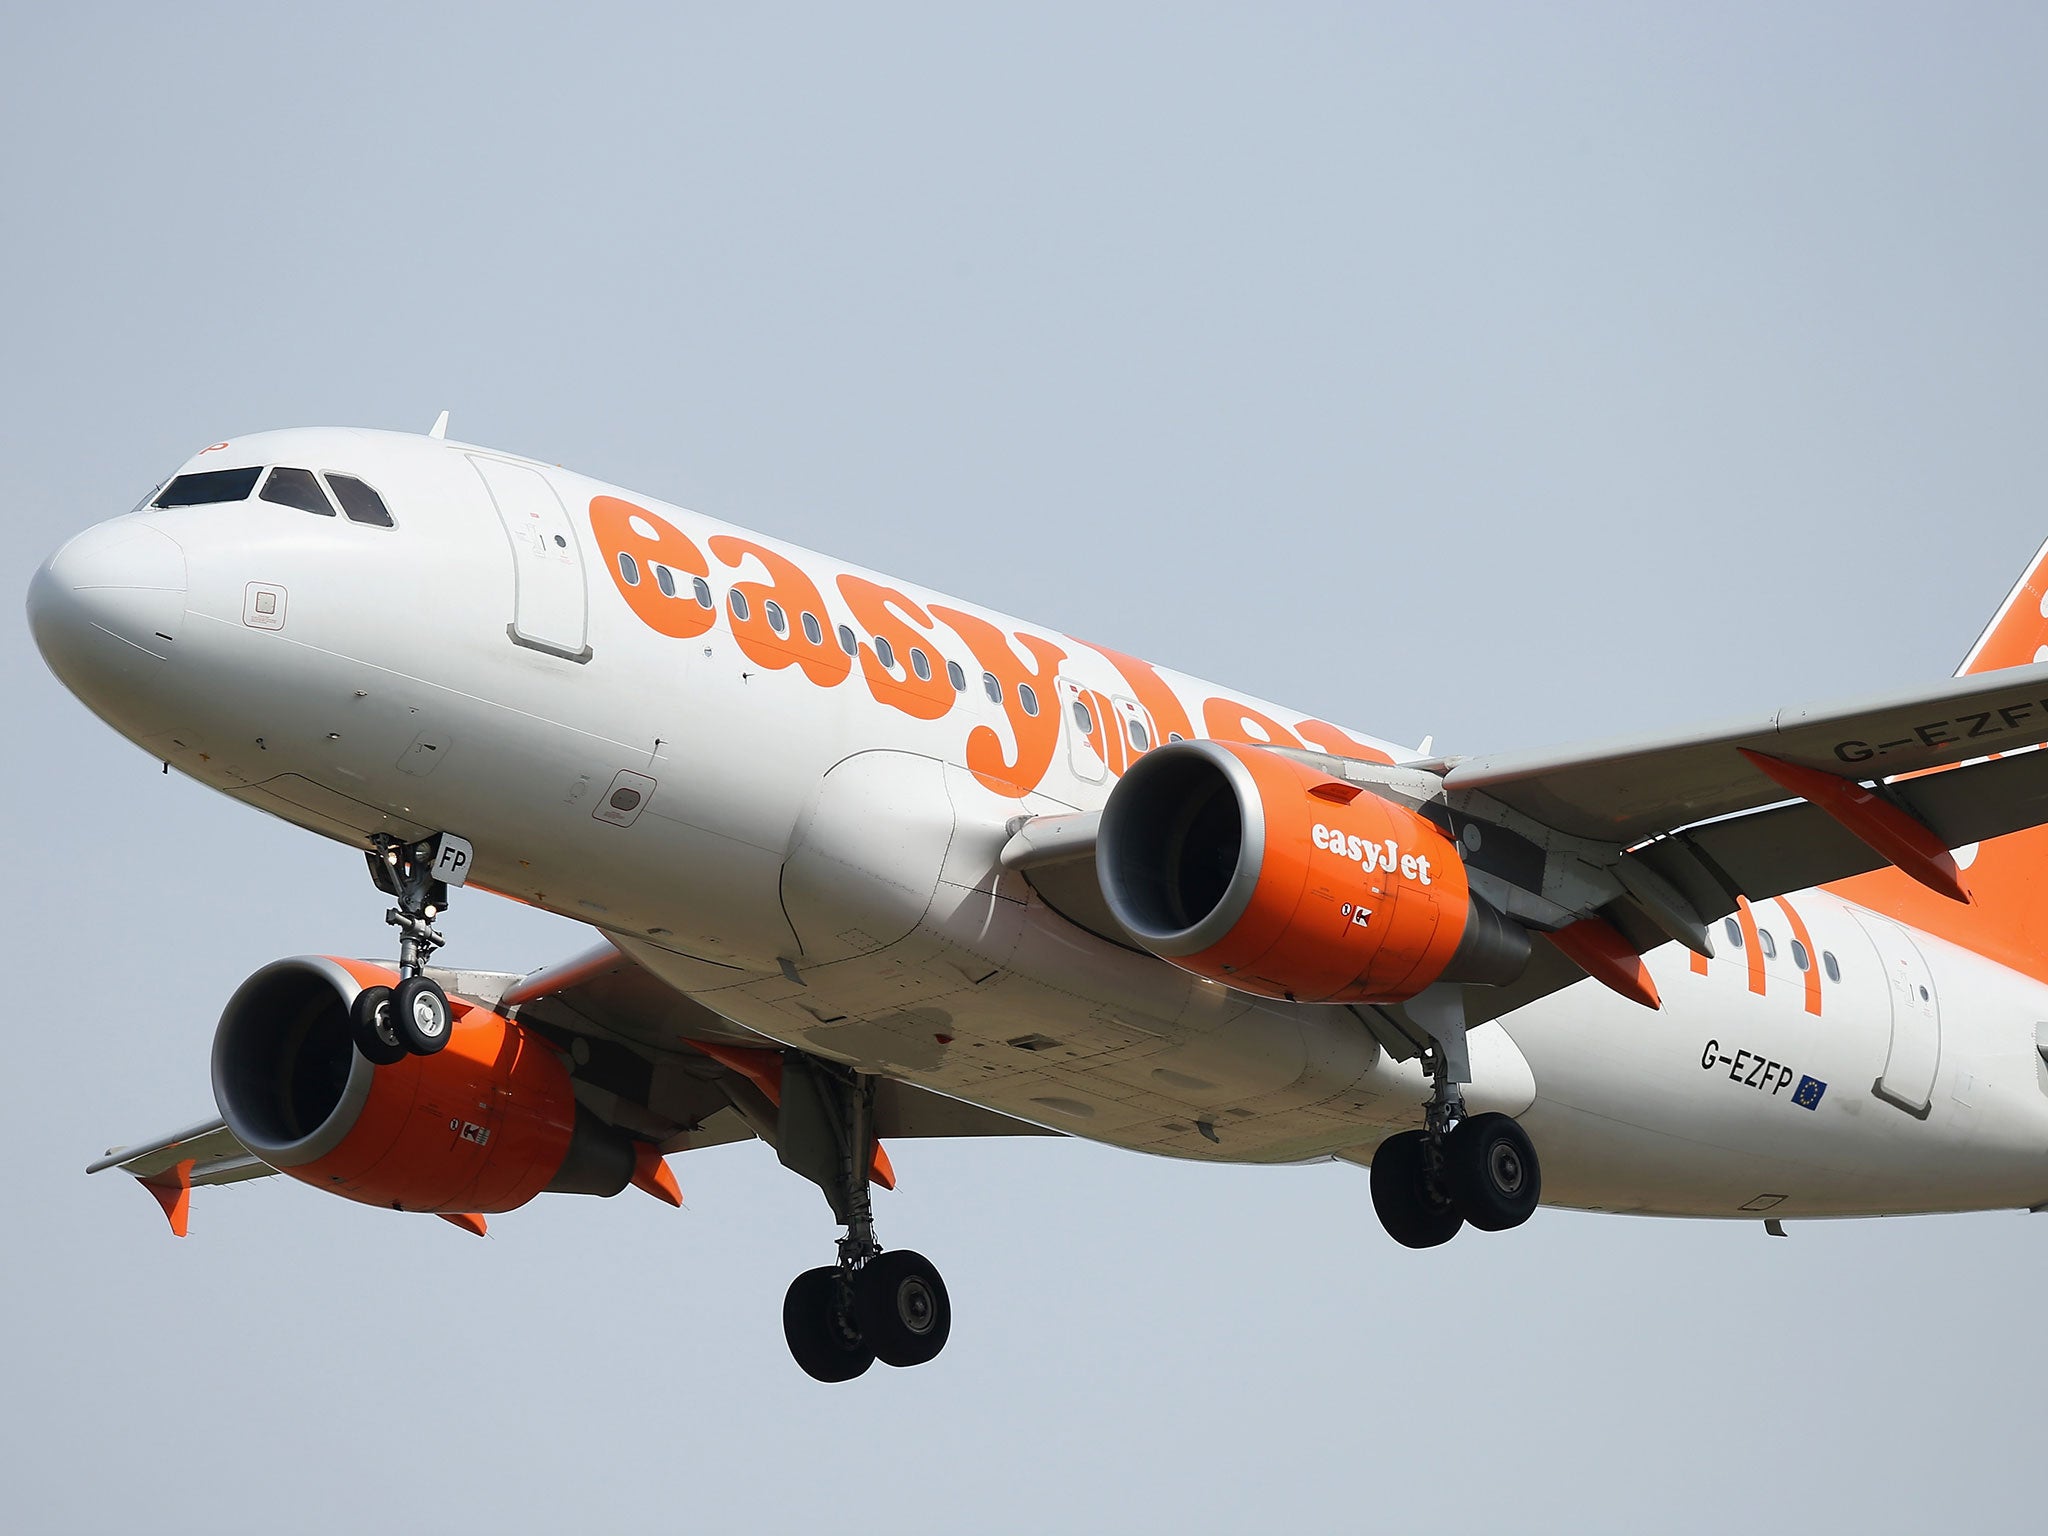 Budget airline EasyJet will not let travellers sprint to meet their flight if they arrive at the airport less than 30 mins before their scheduled departure